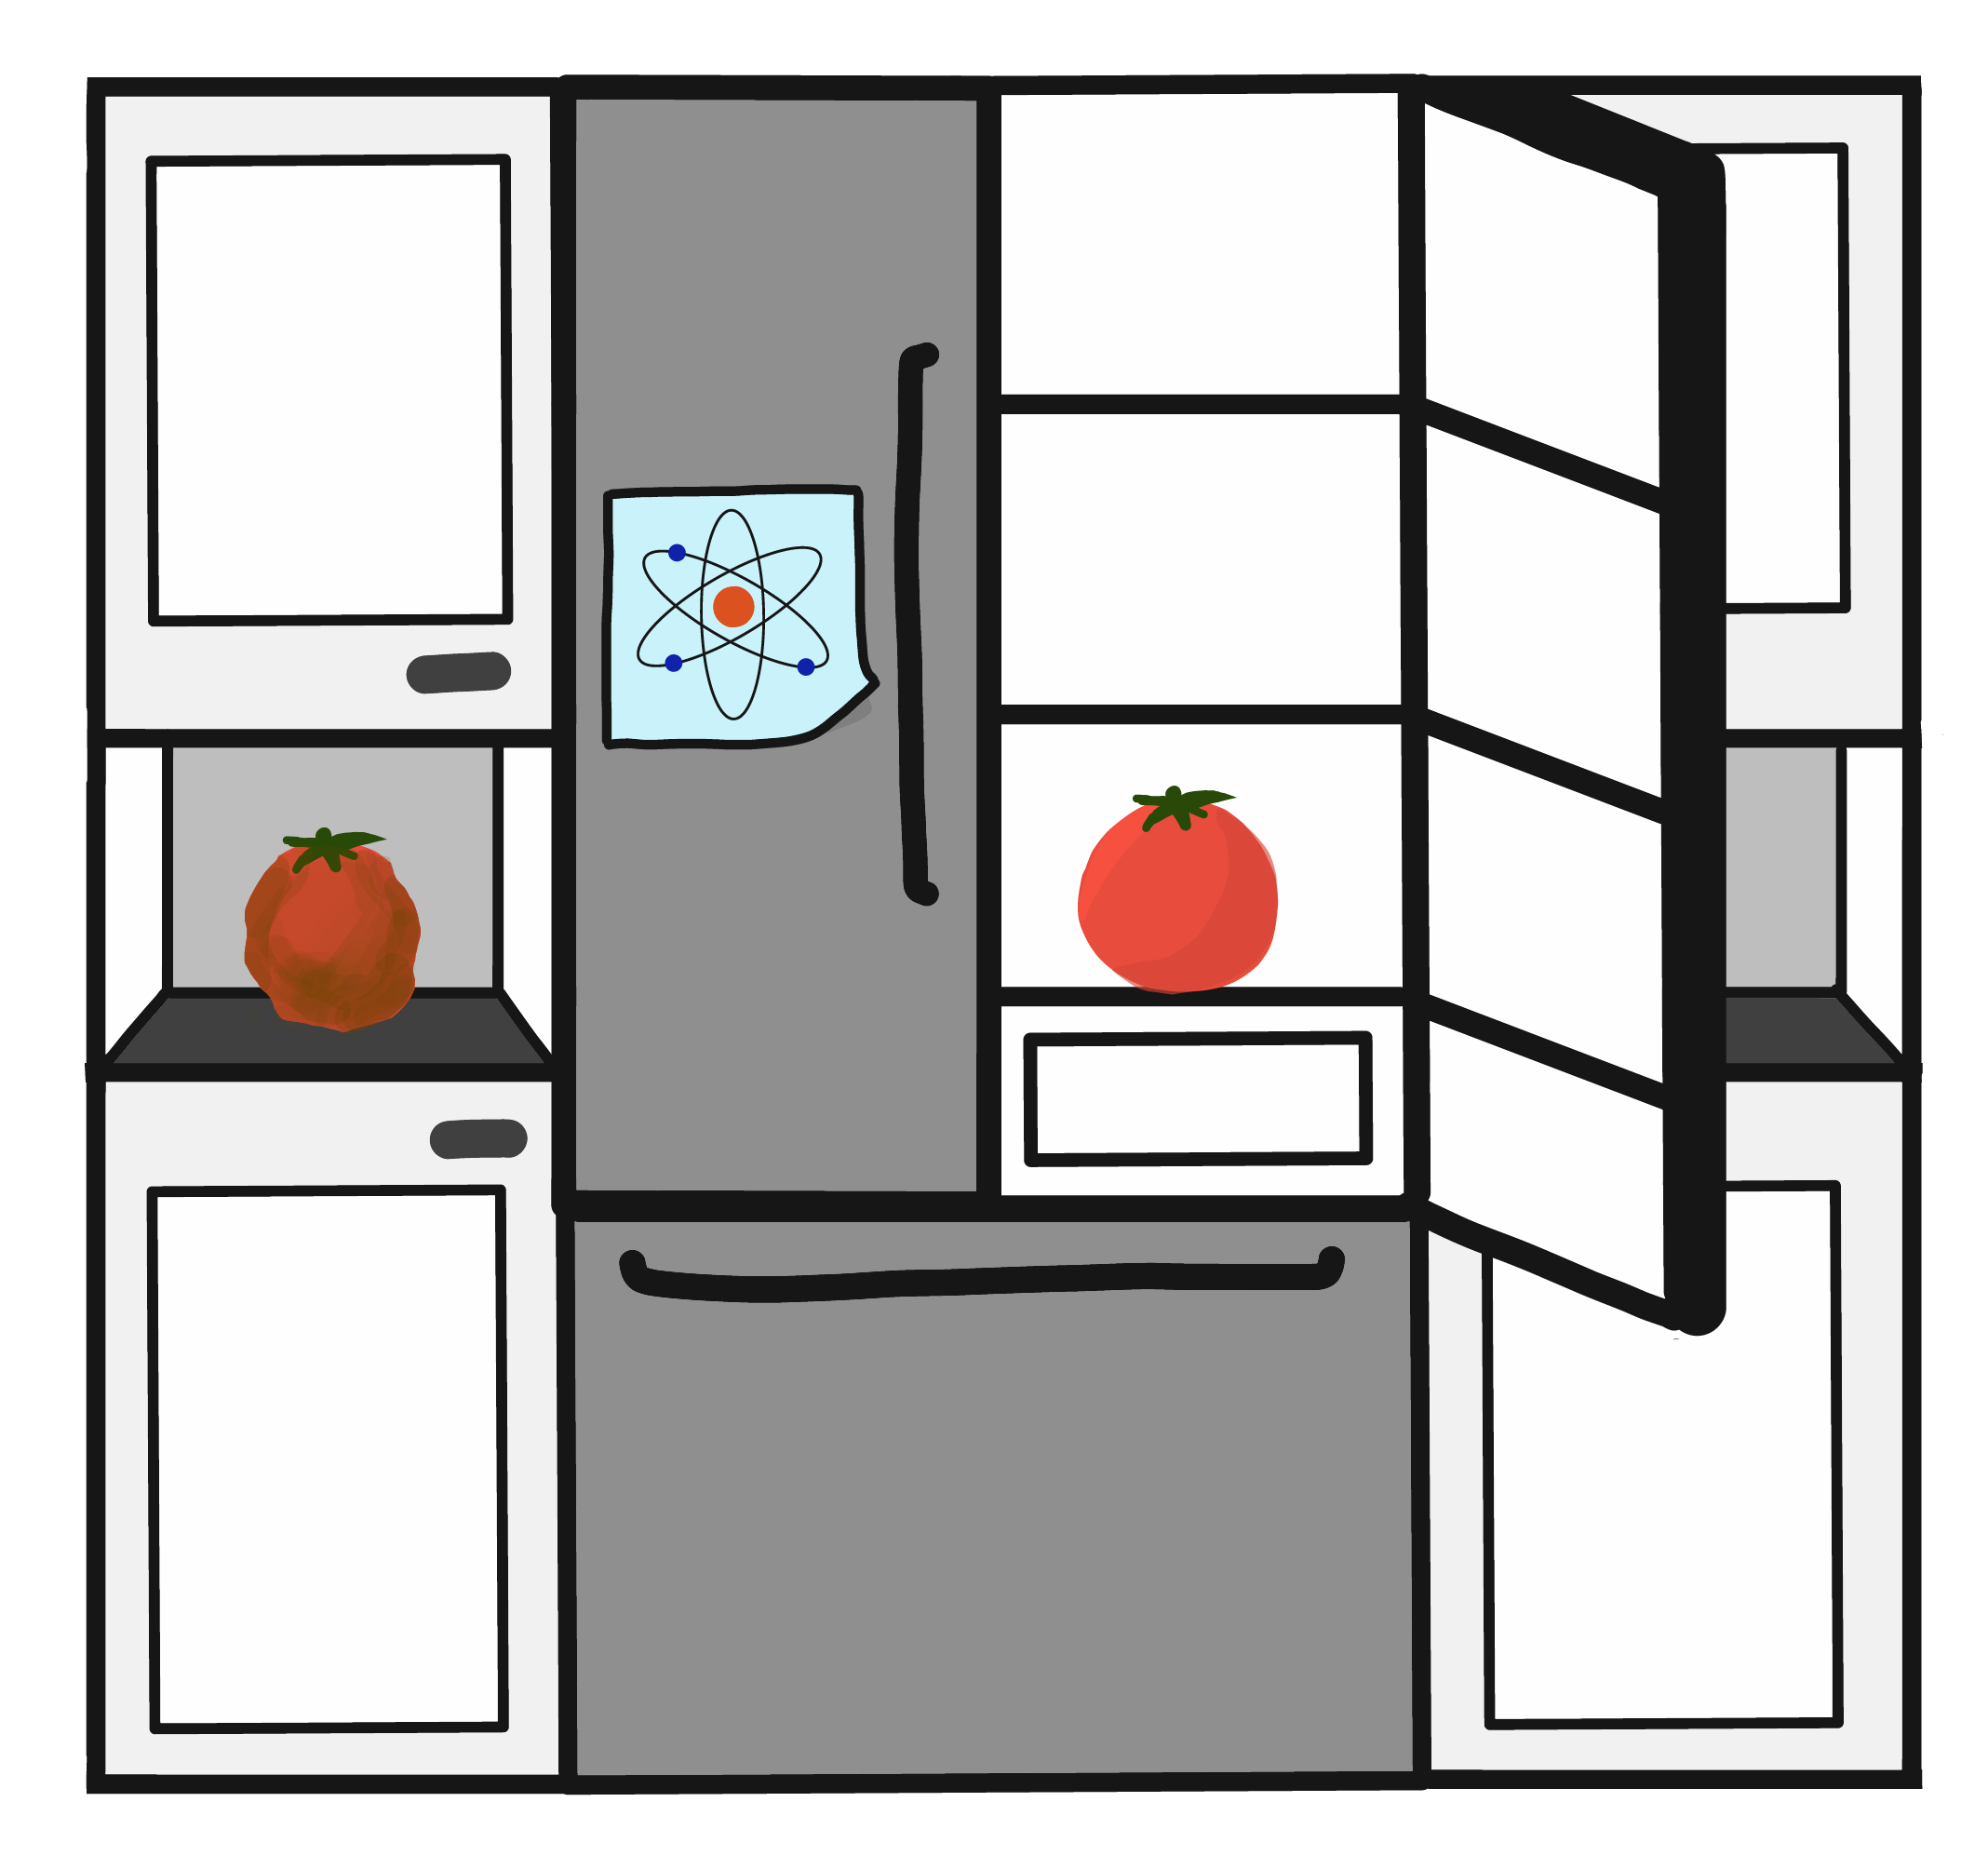 Produce inside a refrigerator will spoil less quickly than produce on the counter